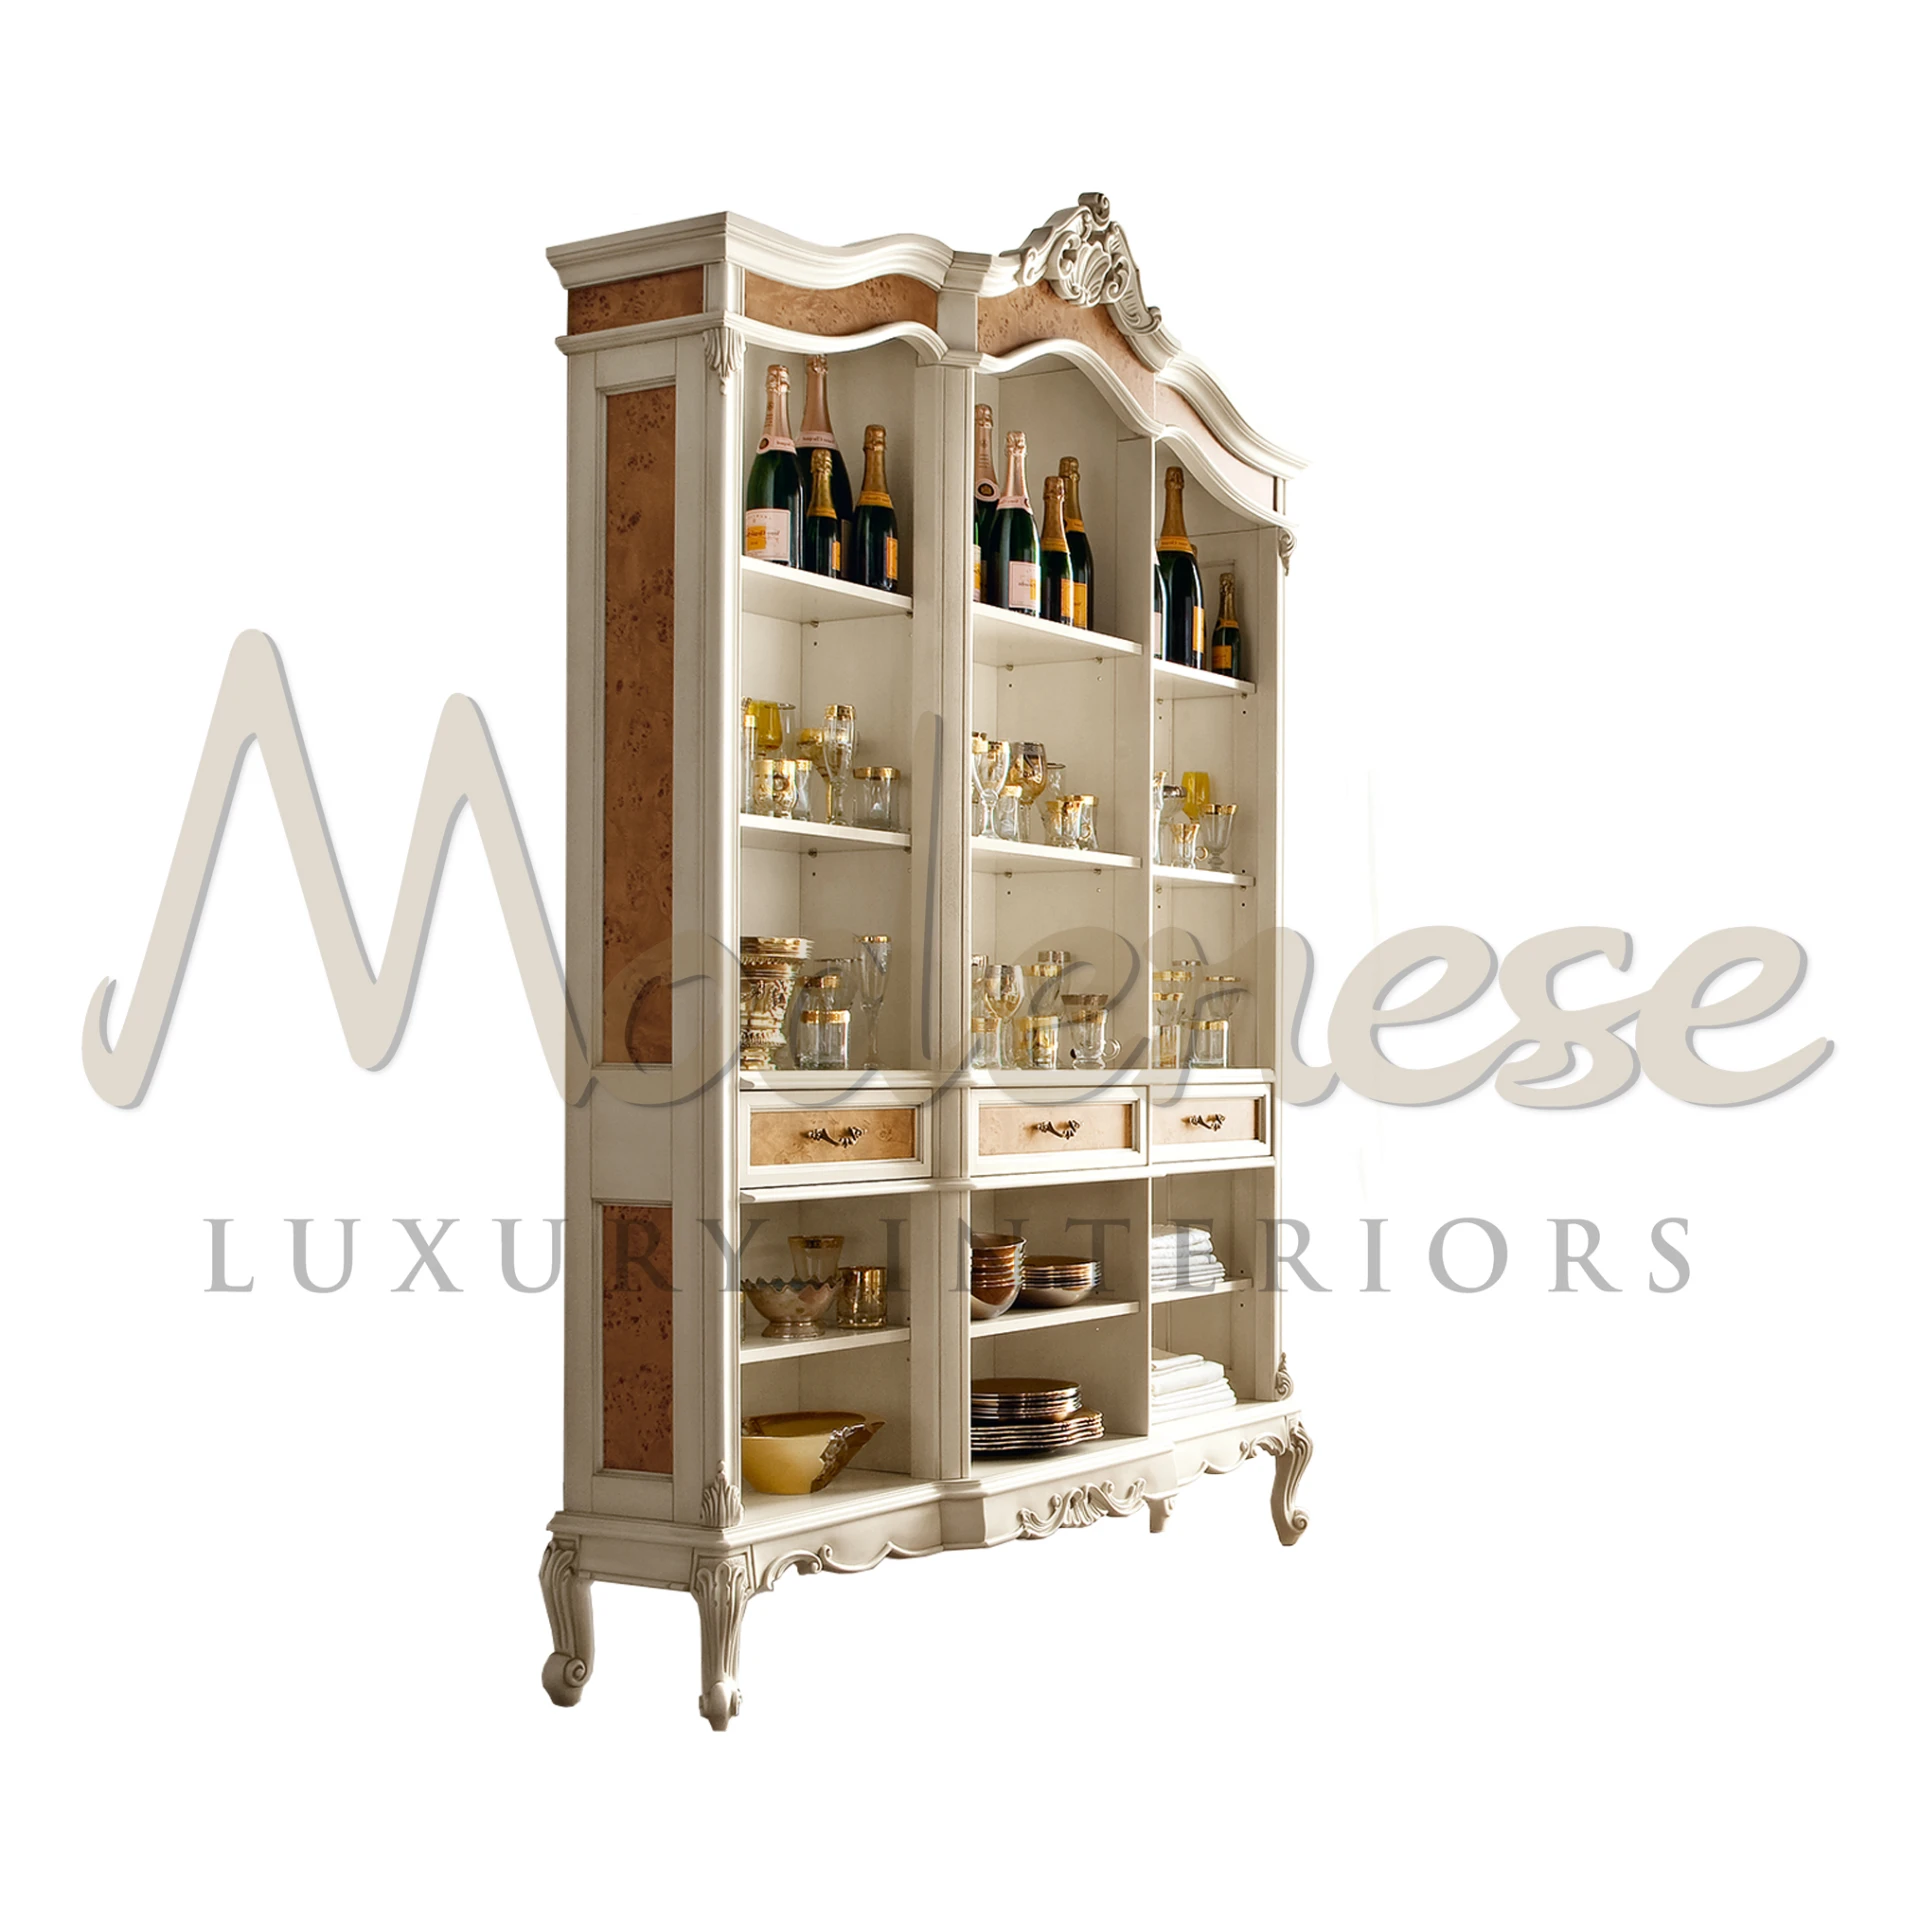 Explore Modenese Furniture's solution for storage with this spacious showcase featuring 15 open compartments and 3 drawers, all elegantly finished.